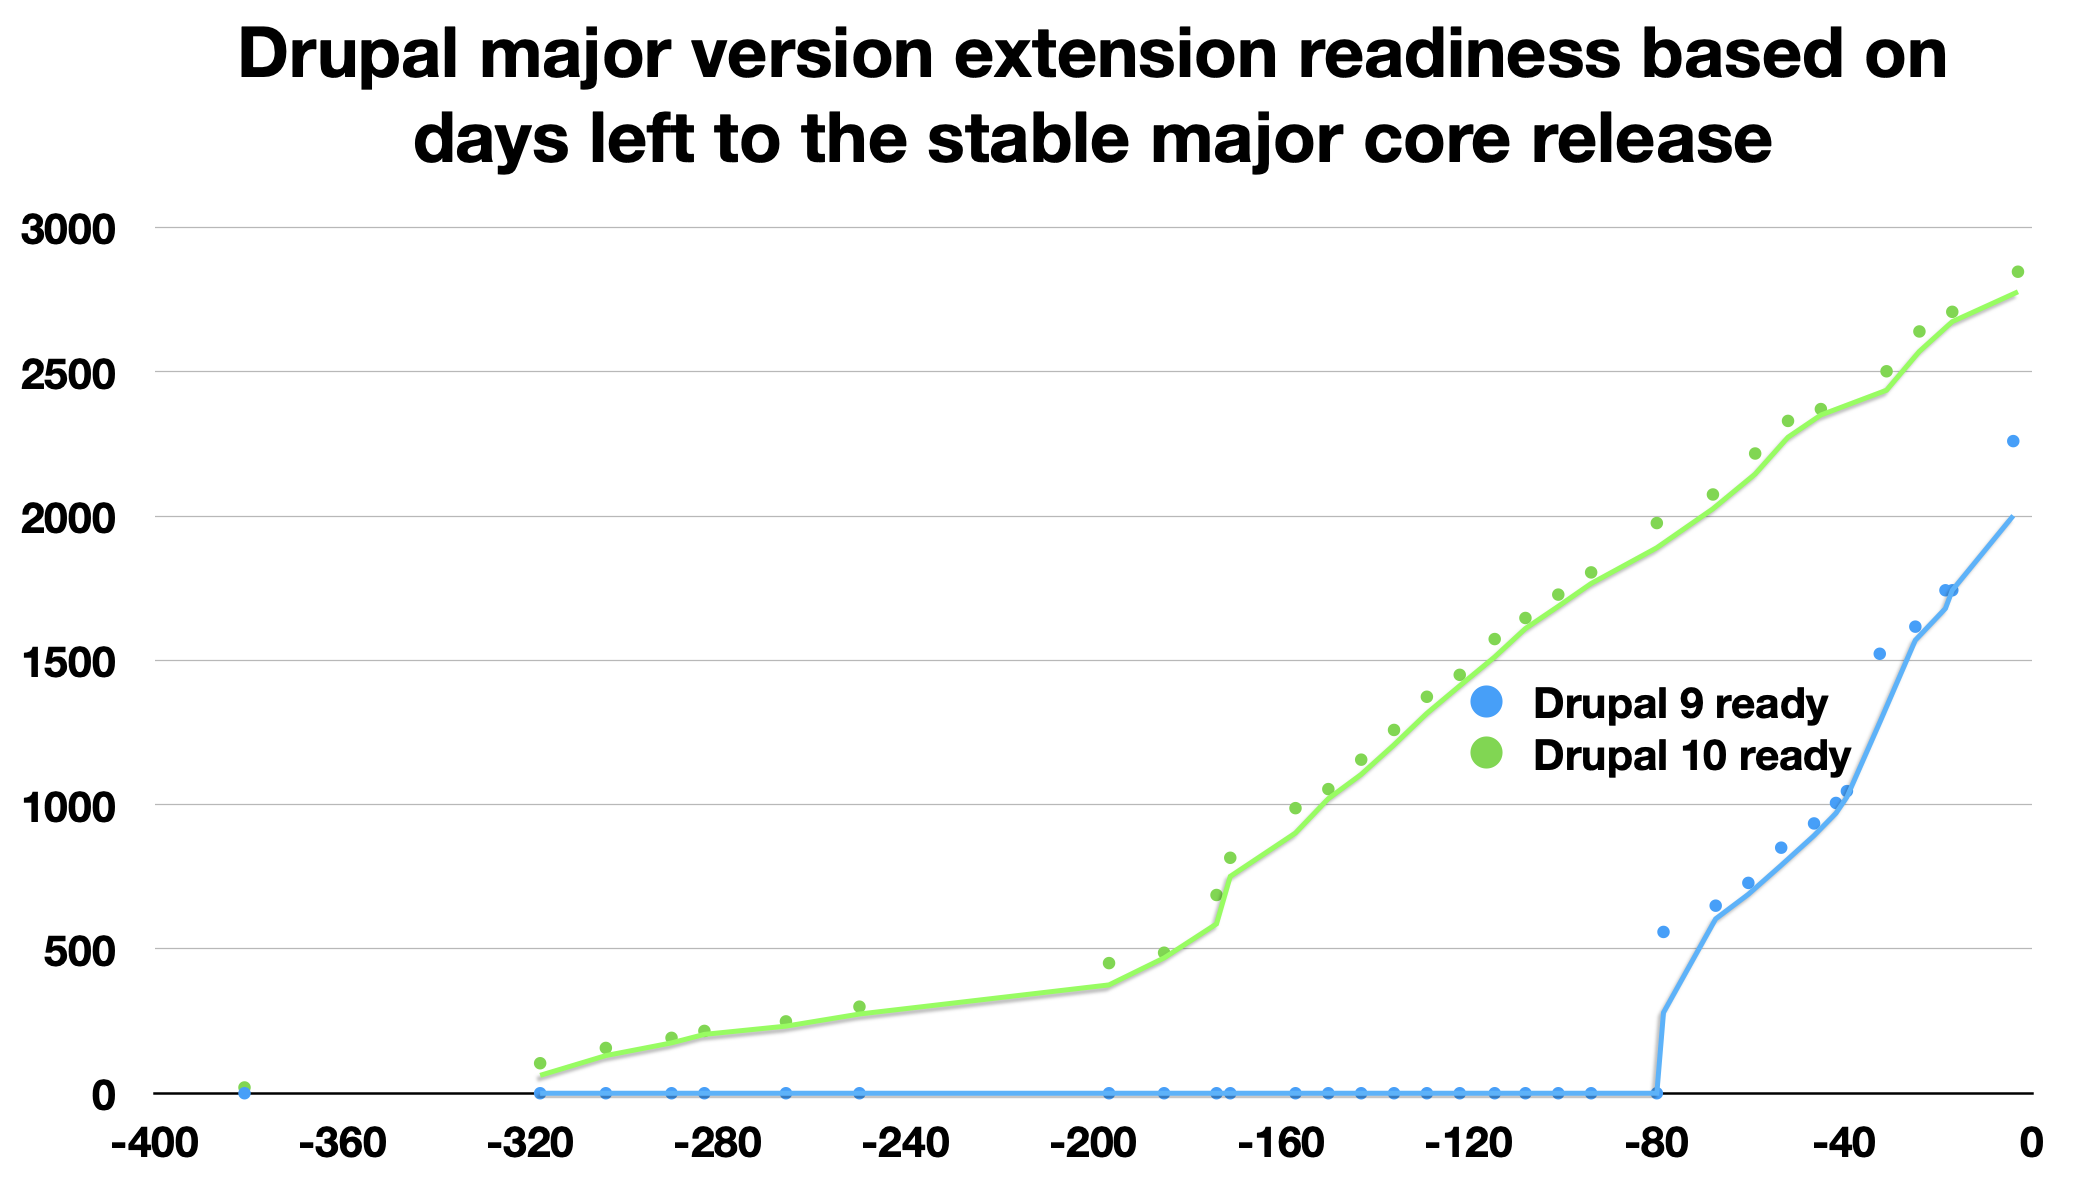 Drupal major version extension readiness based on days left to the stable major core release